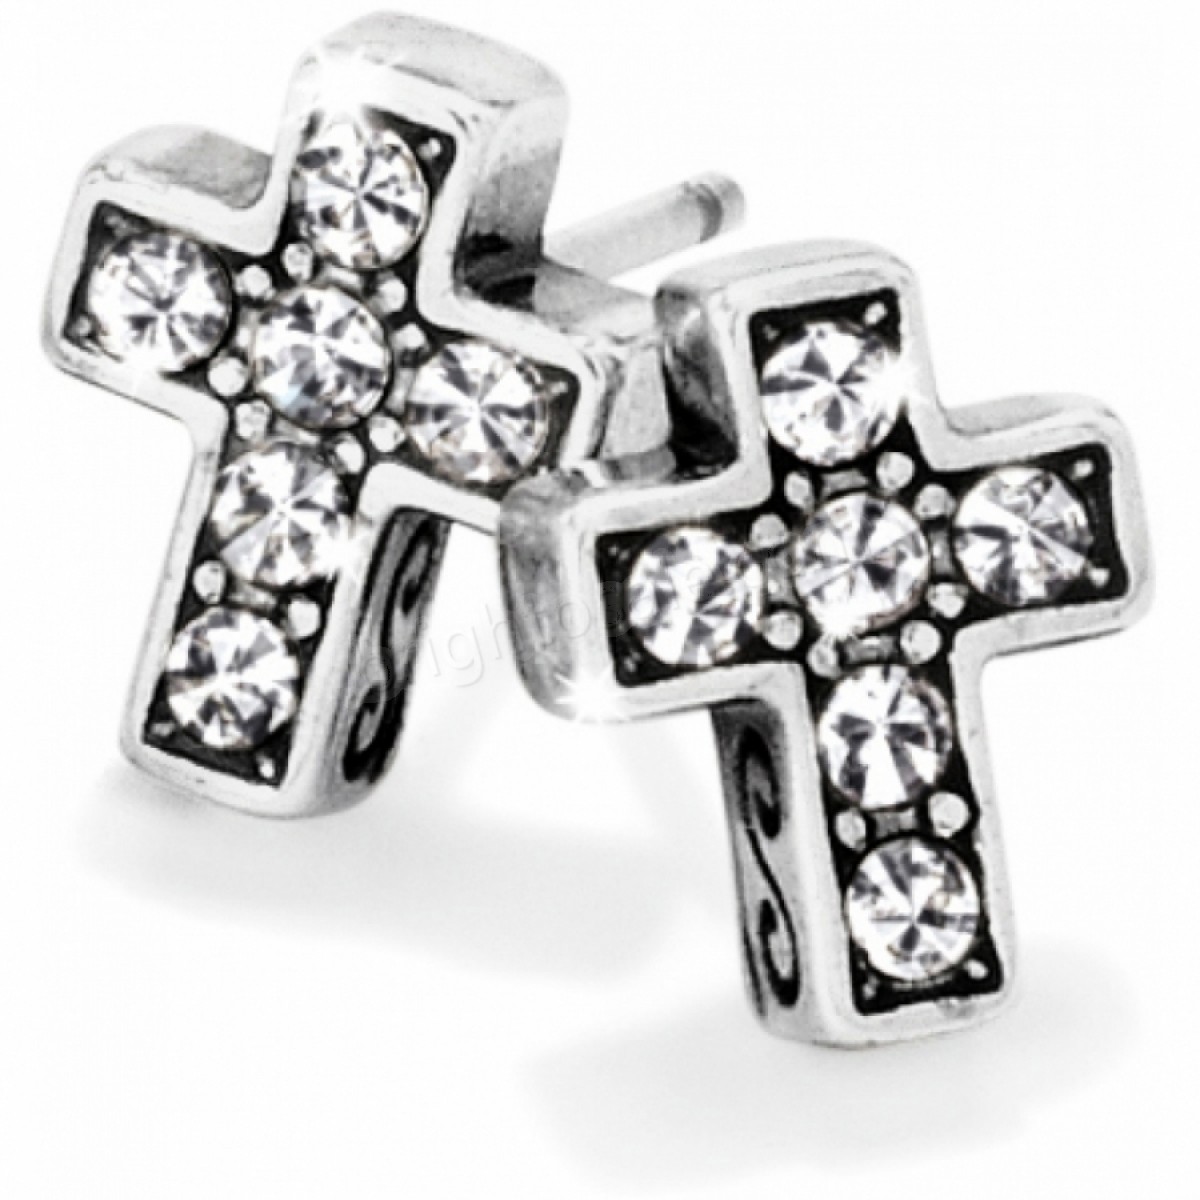 Brighton Collectibles & Online Discount Starry Night Cross Mini Post Earrings - -0